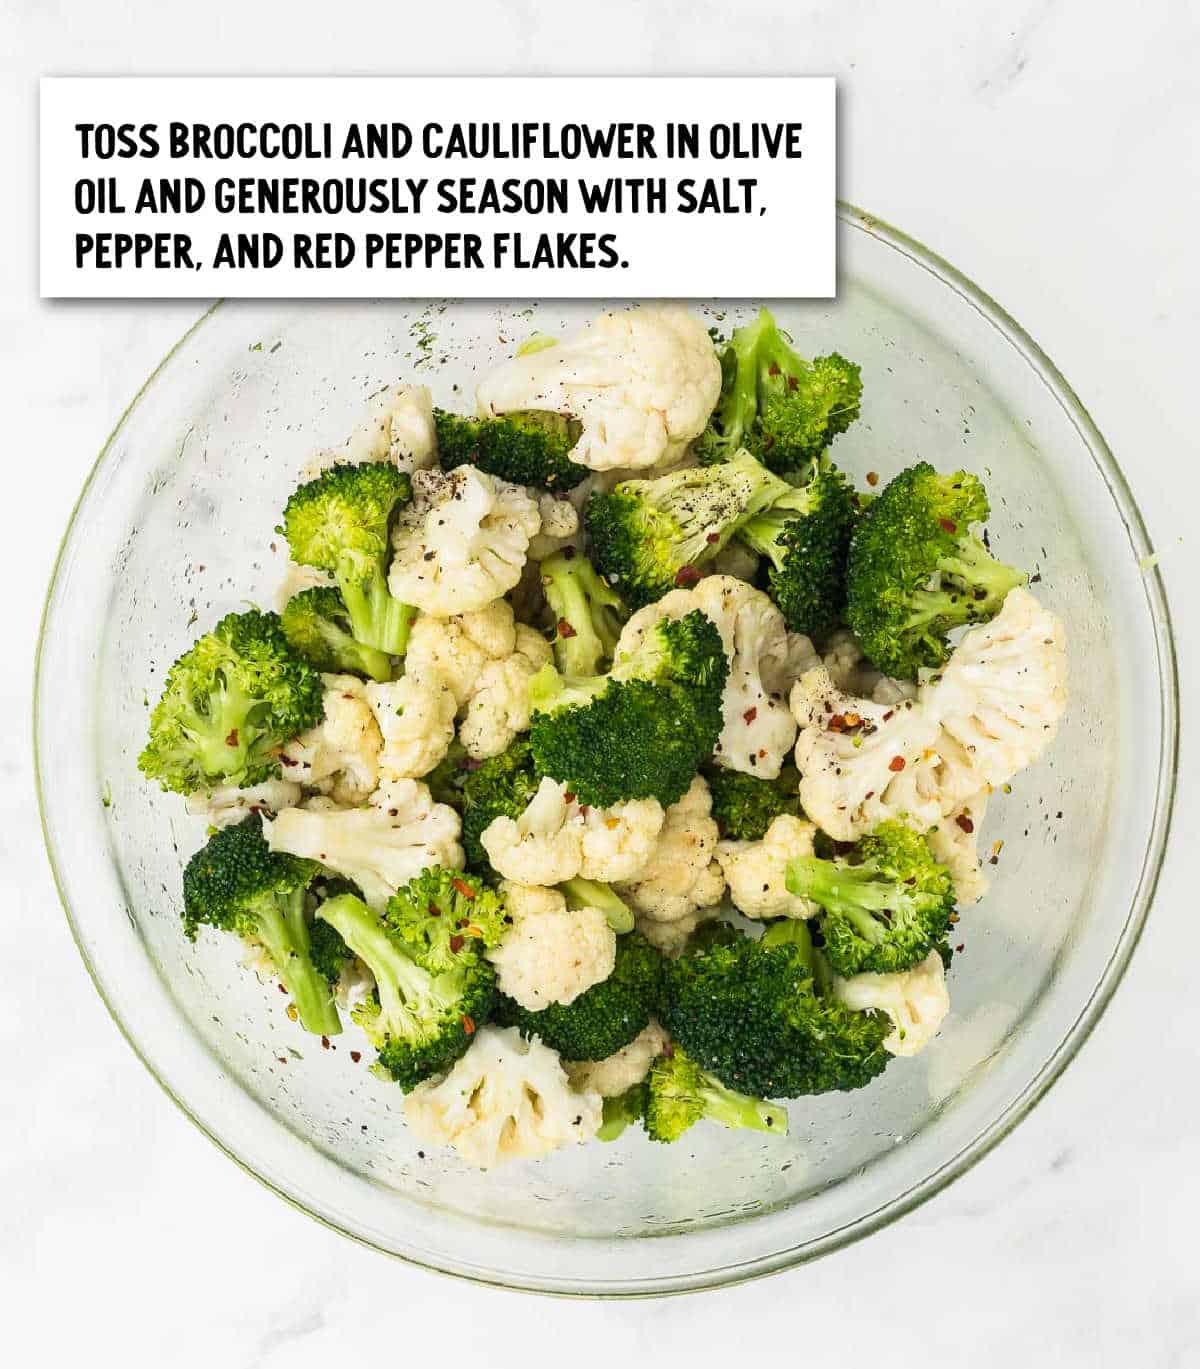 broccoli and cauliflower tossed in olive oil and seasoned in a large glass bowl